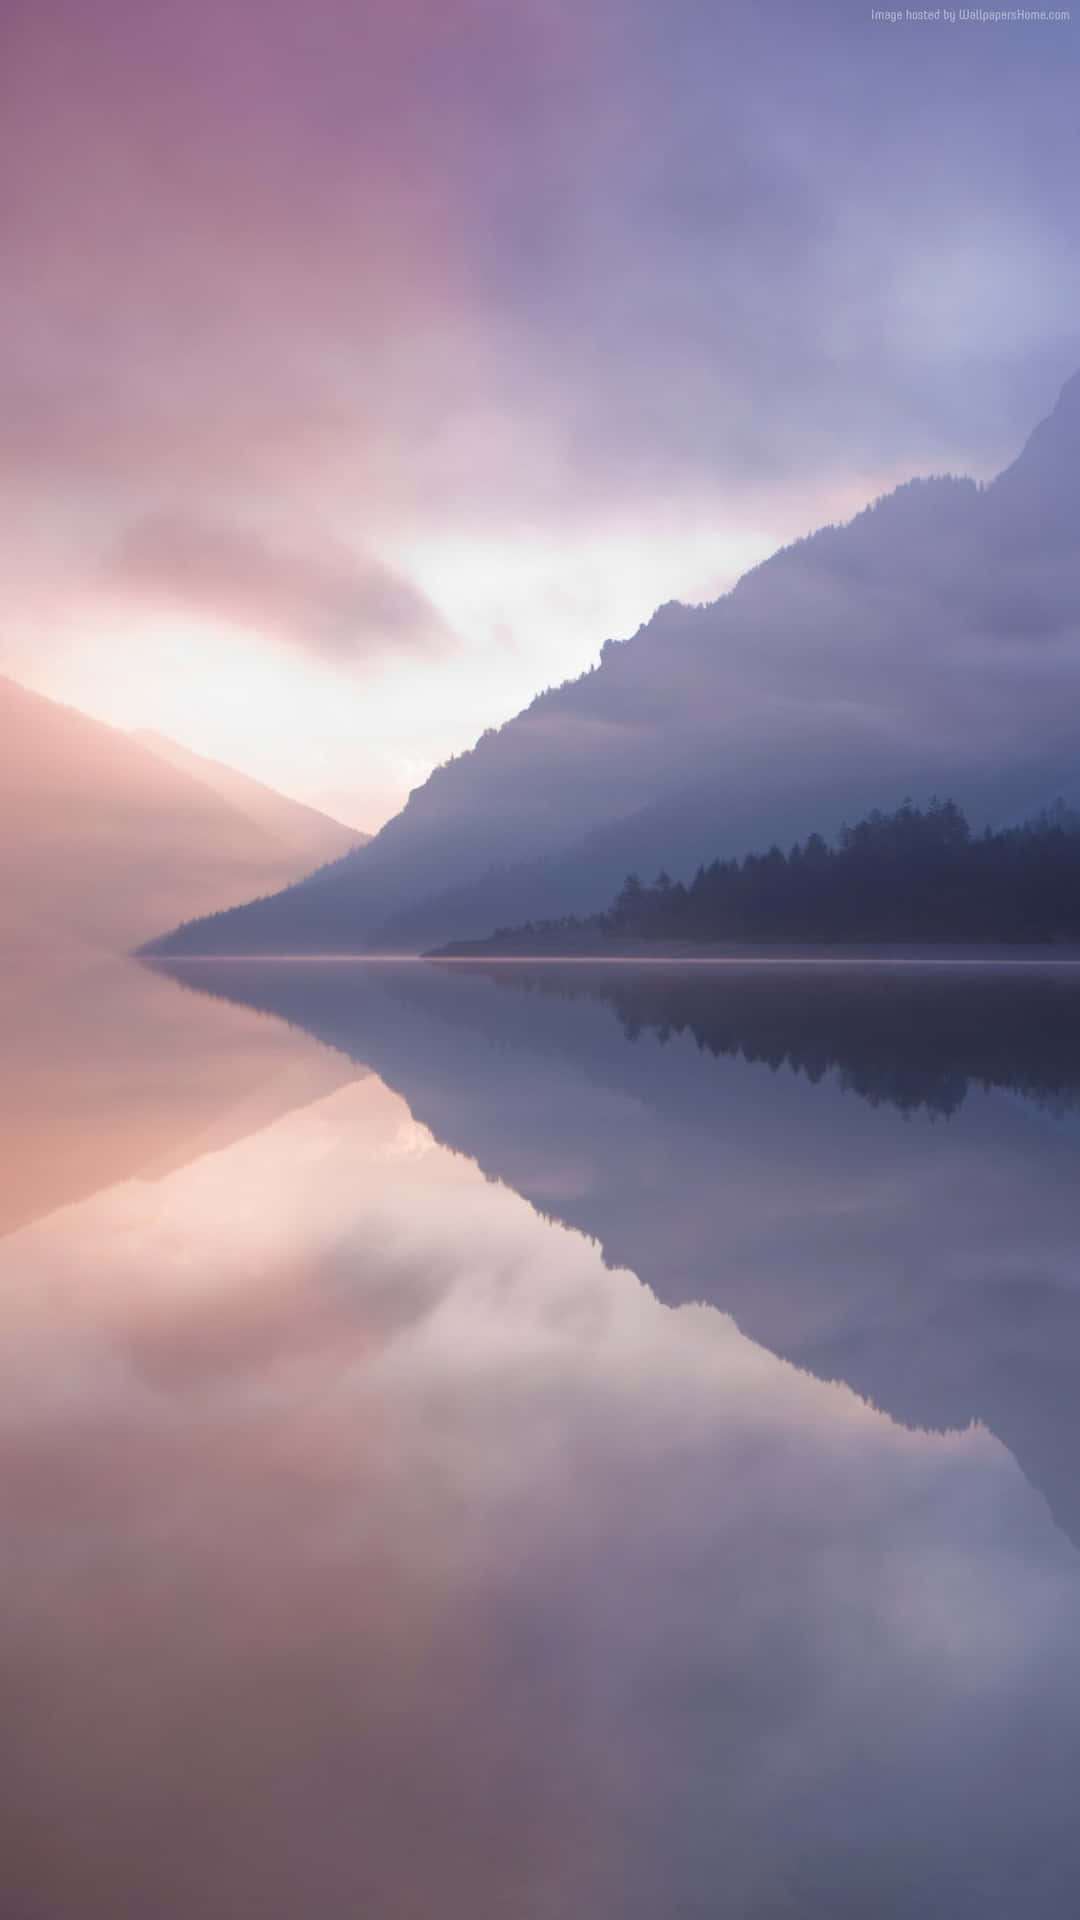 A Lake With Mountains And Fog Reflected In It Wallpaper